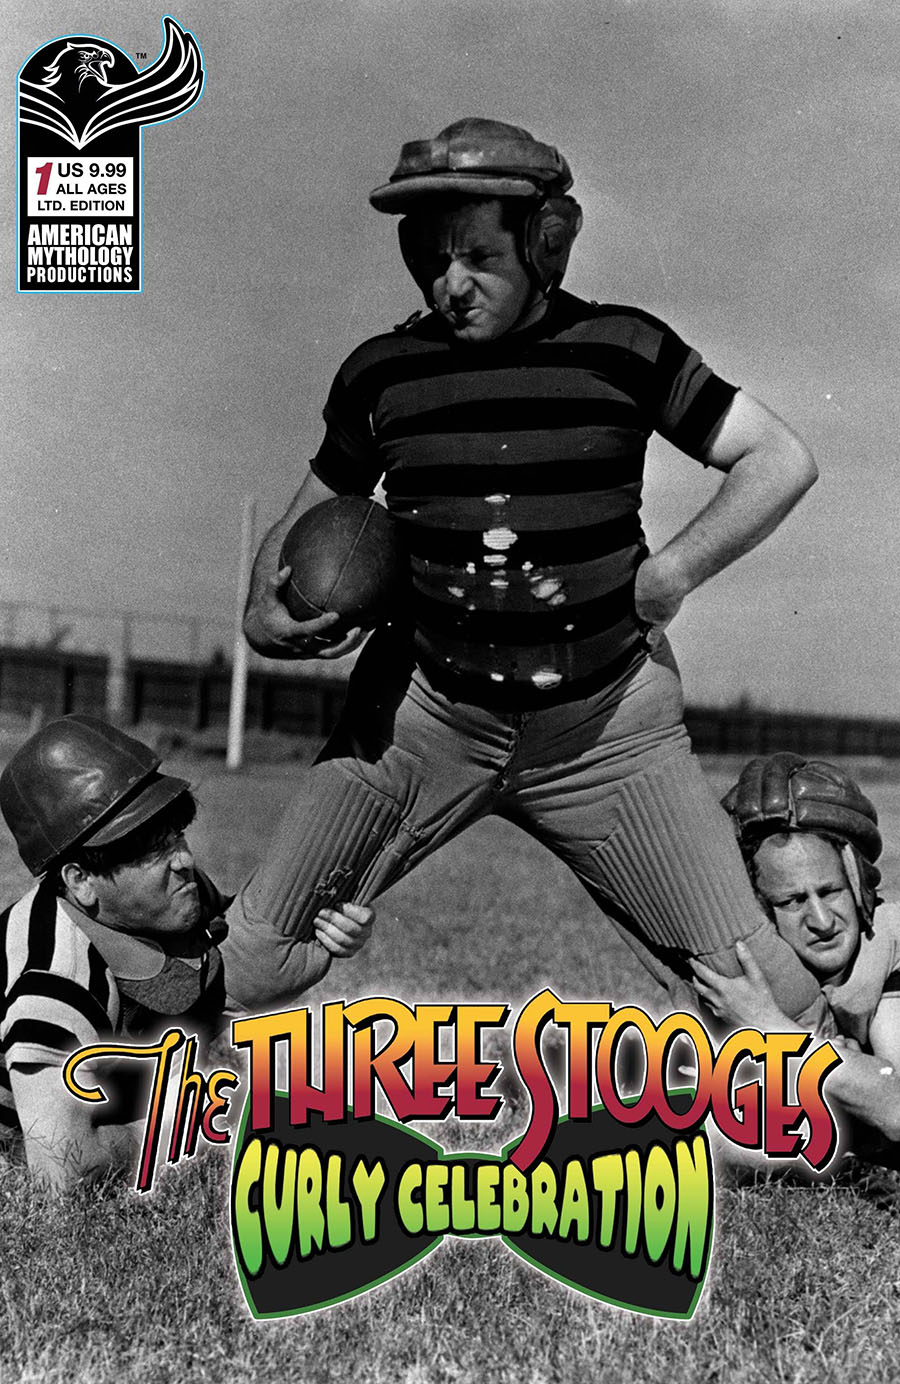 Three Stooges Curly Celebration #1 (One Shot) Cover C Limited Edition Black & White Throwback Photo Cover